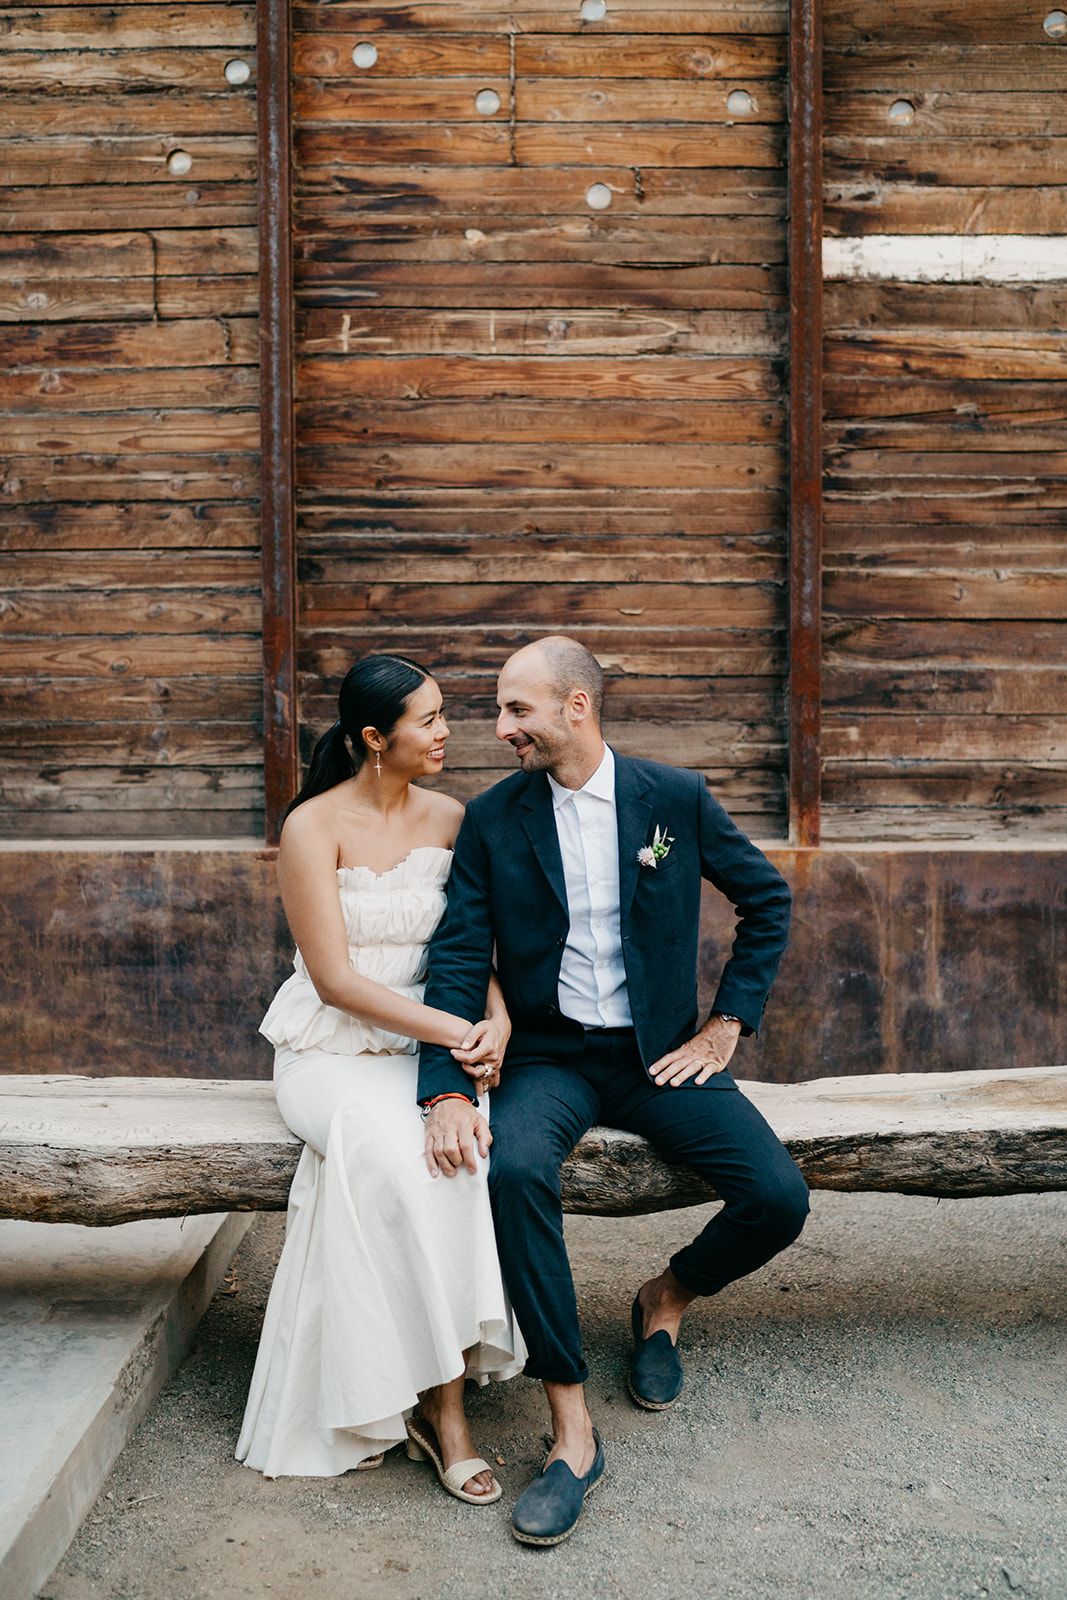 This Jewelry Designer Opted For A No Fuss All Fashion Wedding In Baja